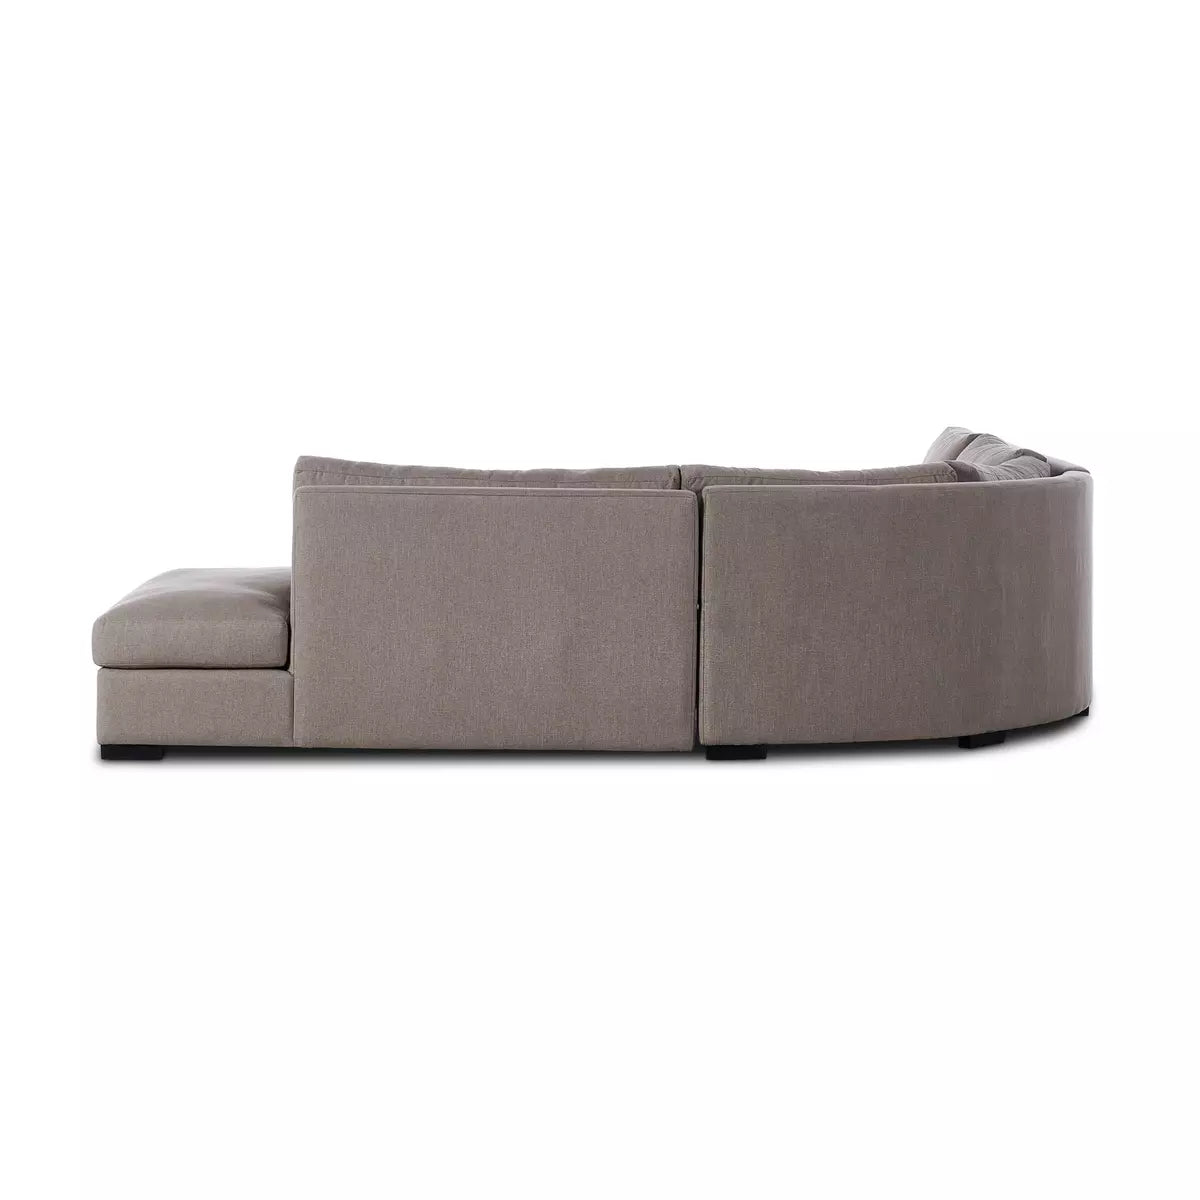 Albany 3-Piece Sectional Right Facing Bumper Chaise Vesuvio Cafe